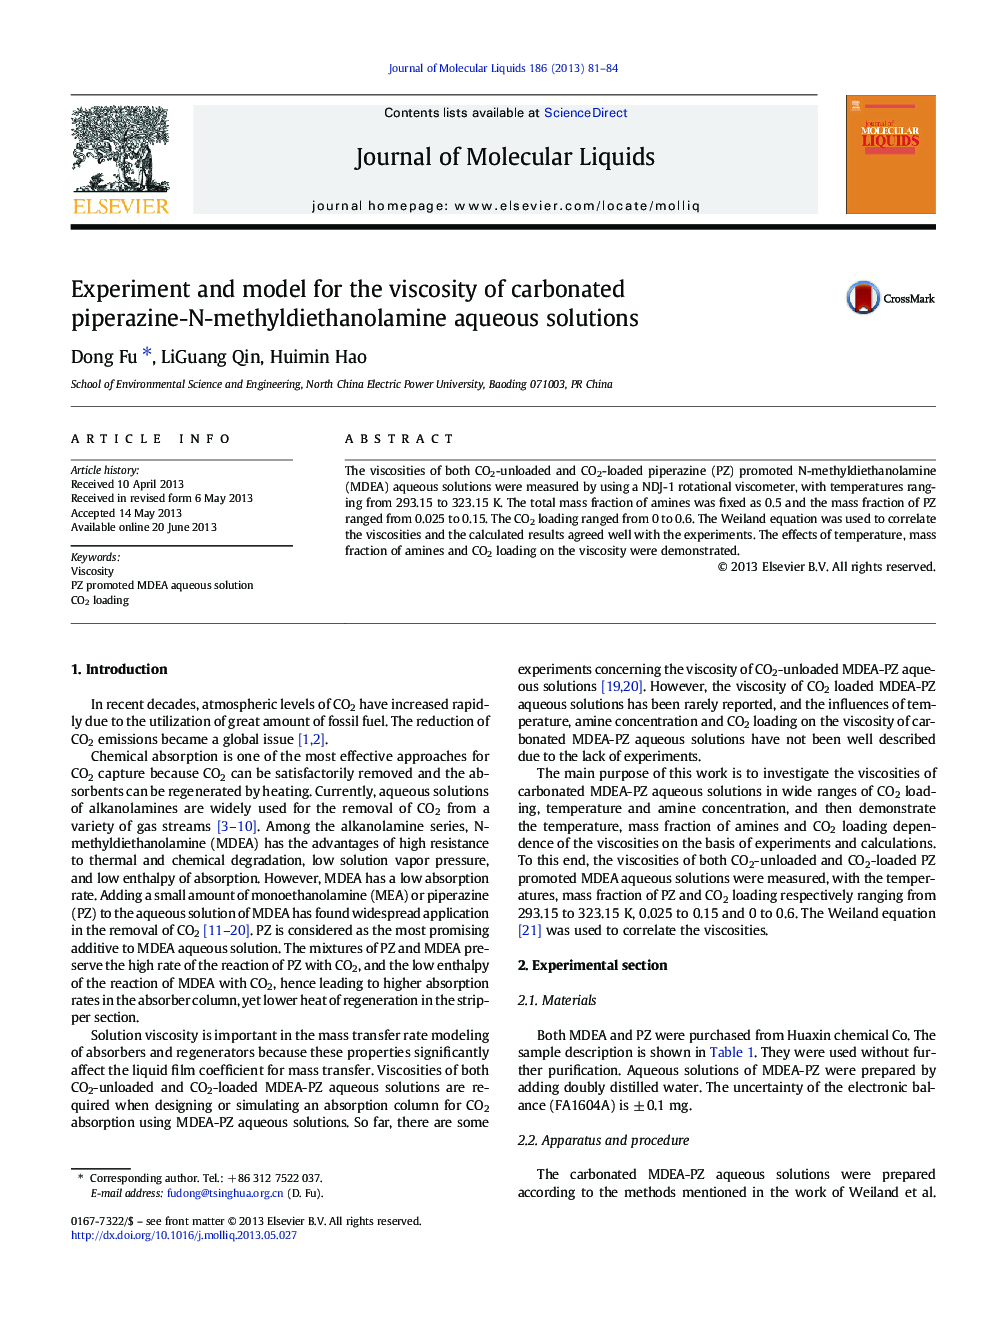 Experiment and model for the viscosity of carbonated piperazine-N-methyldiethanolamine aqueous solutions